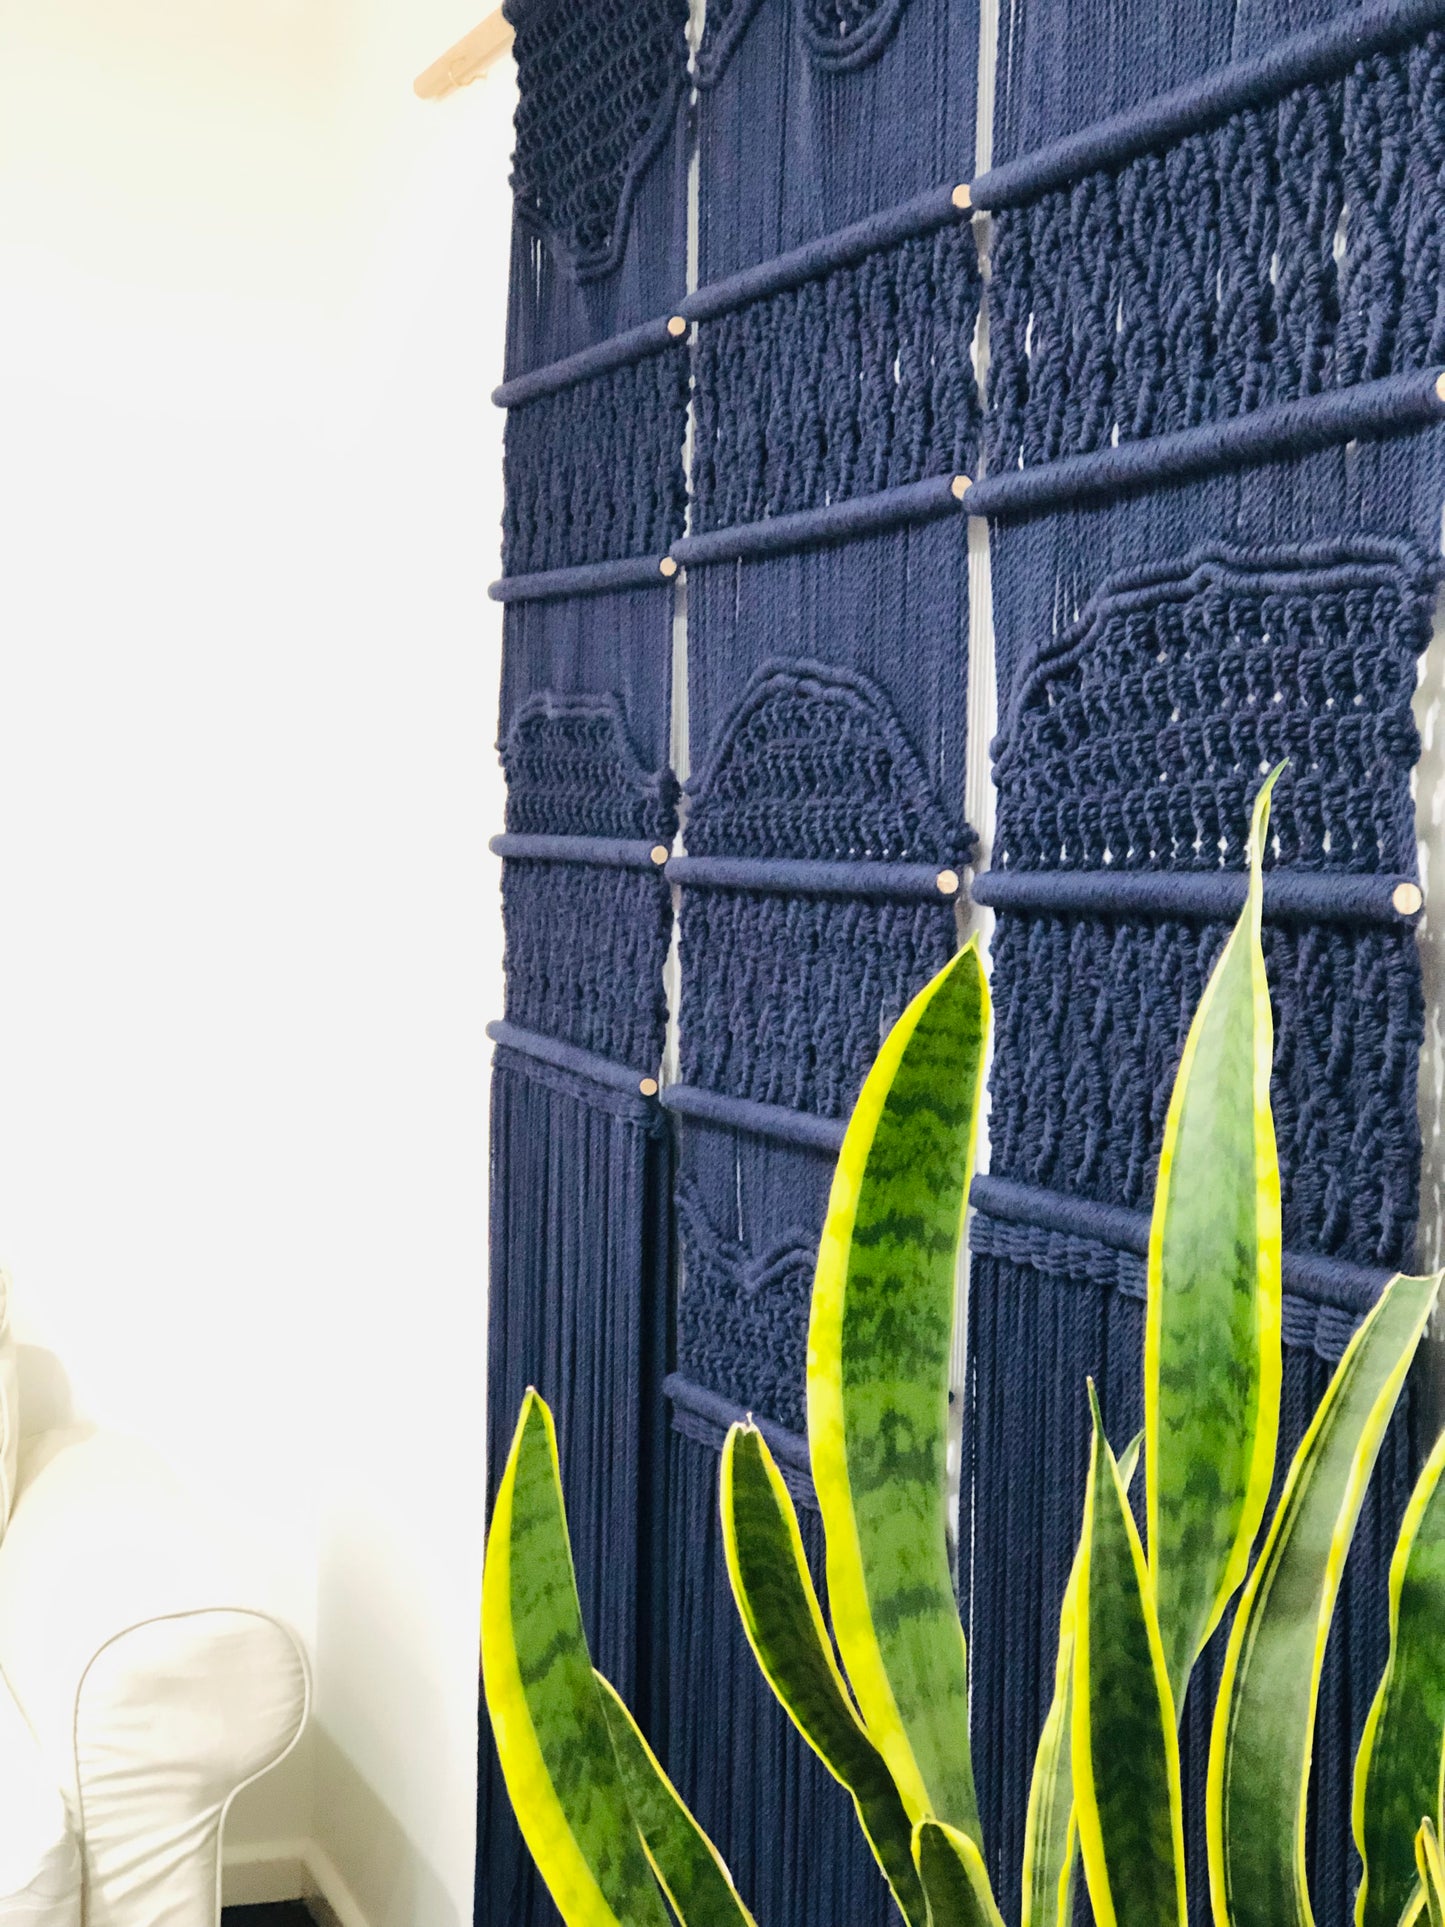 Super Sized Macrame Wall Hanging - Knotted by Hand